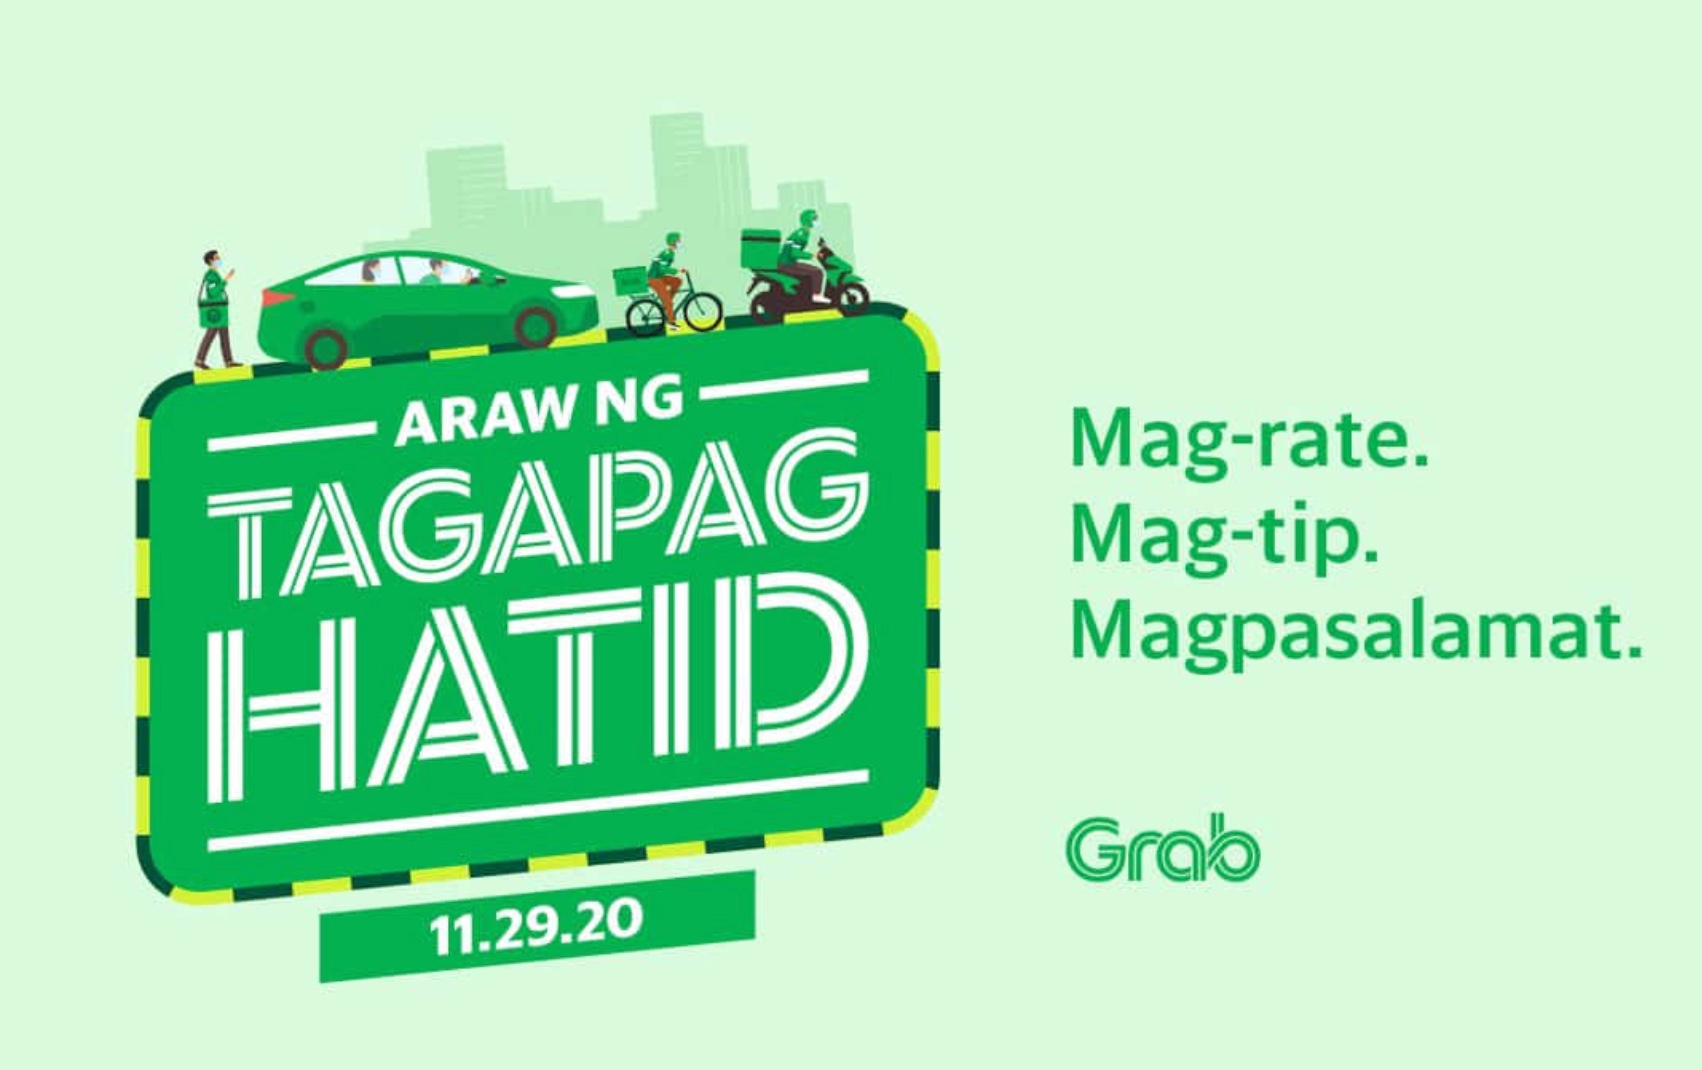 Grab leads community-wide celebration and appreciation for Filipino drivers and delivery riders on Nov 29 through Araw ng Tagapaghatid